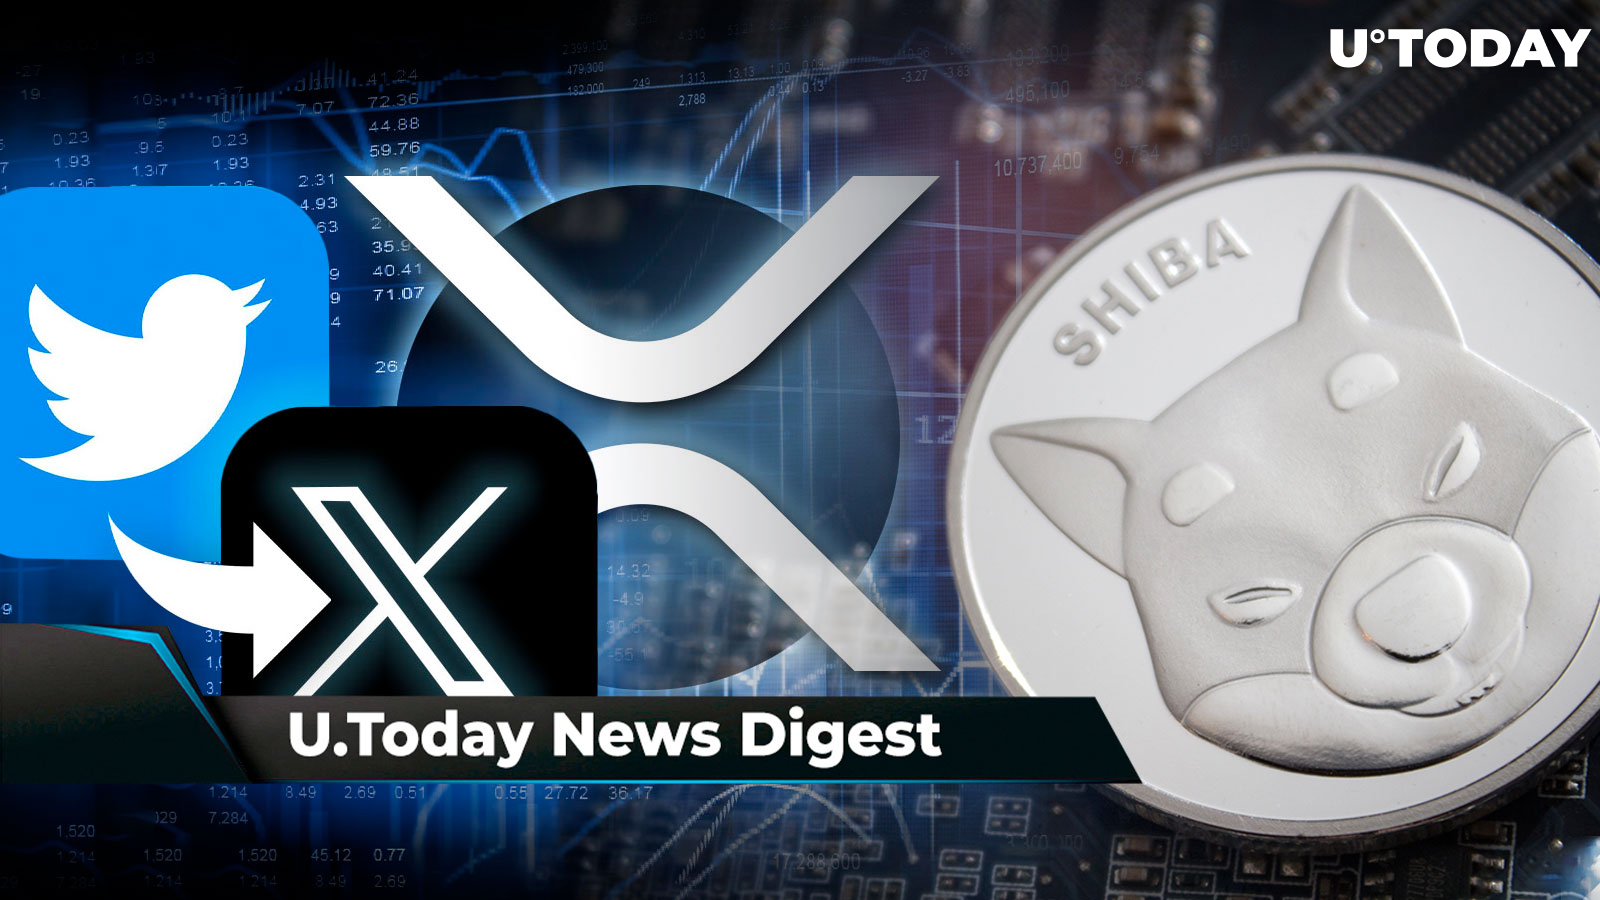 XRP Now Oversold, Big News May Be Coming for Shiba Inu, XRP Army Fascinated by New Twitter 'X' Logo: Crypto News Digest by U.Today